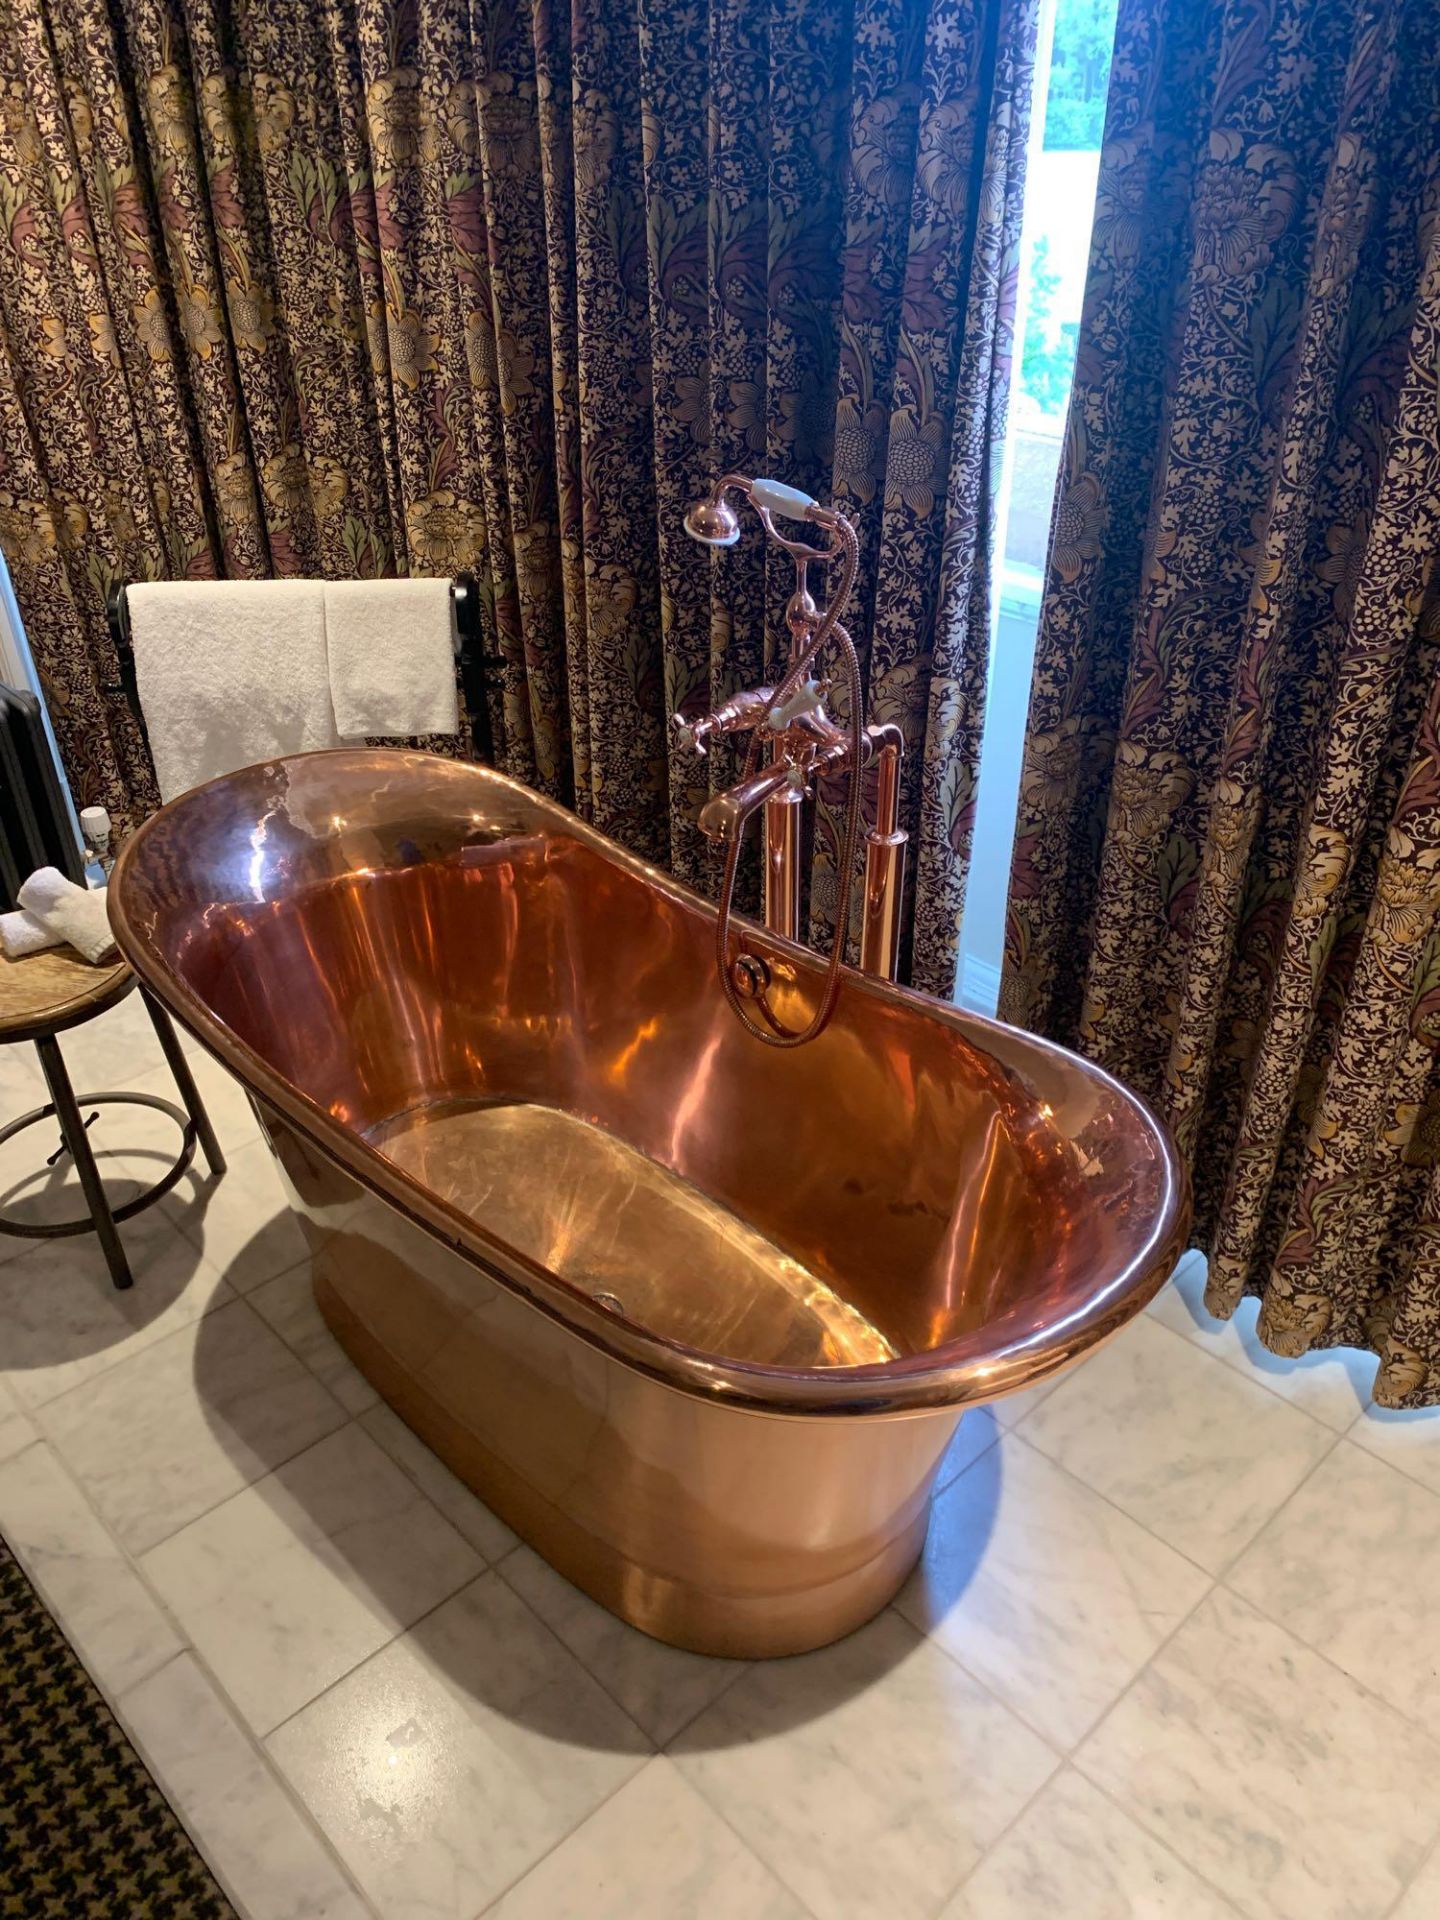 Copper Slipper Bath With Taps And Shower Polished Copper Throughout 150cm x 65cm x 64cm - Image 2 of 5